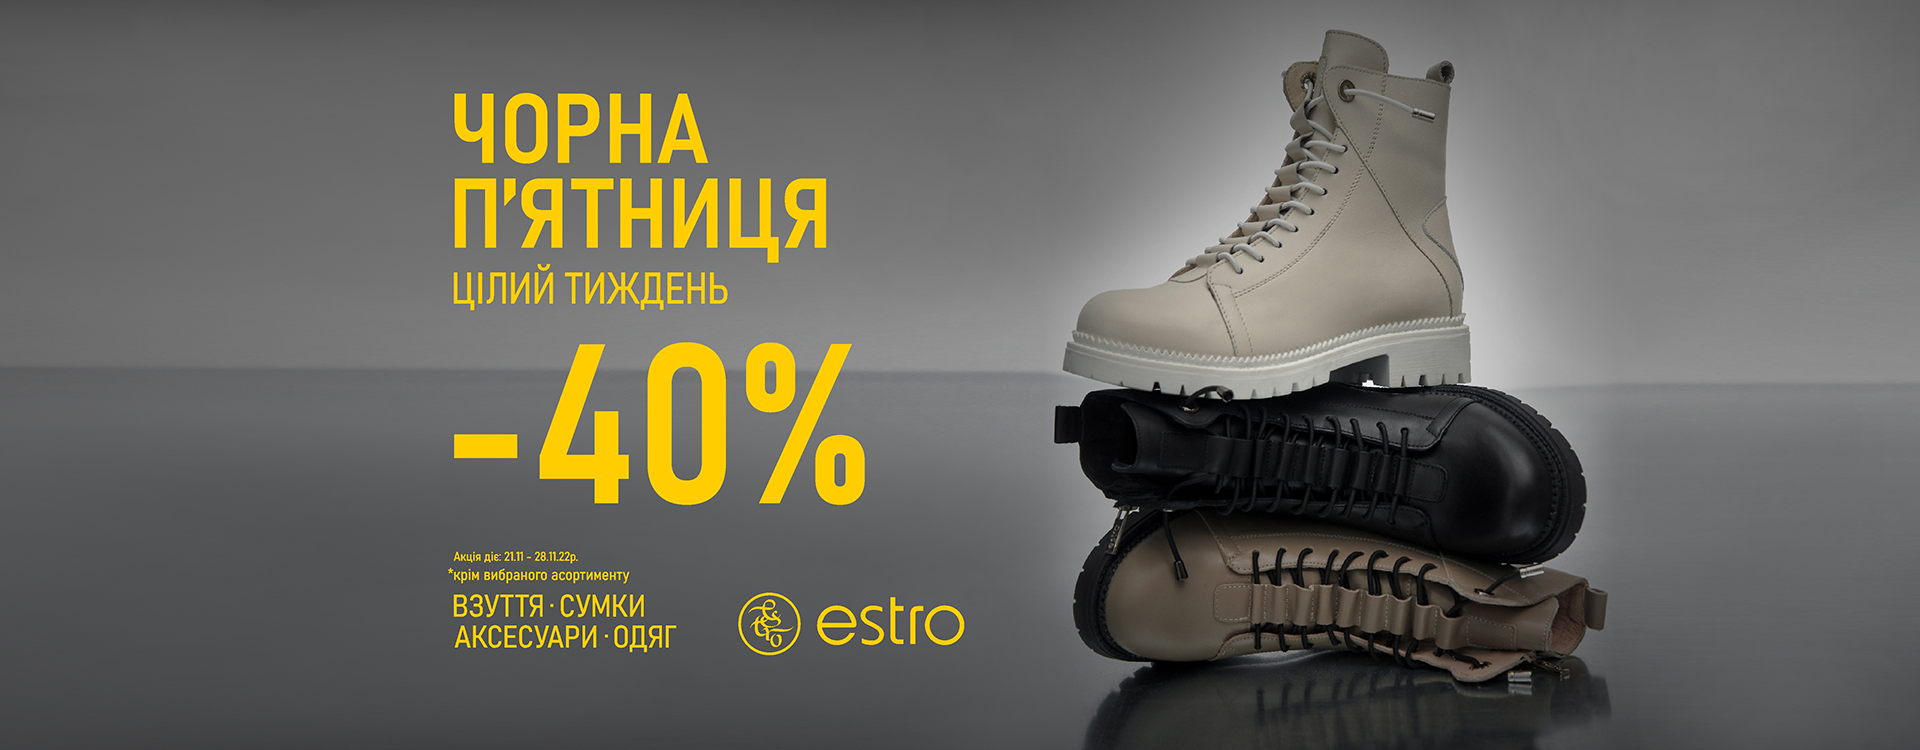 -40% on shoes, clothes, bags and accessories